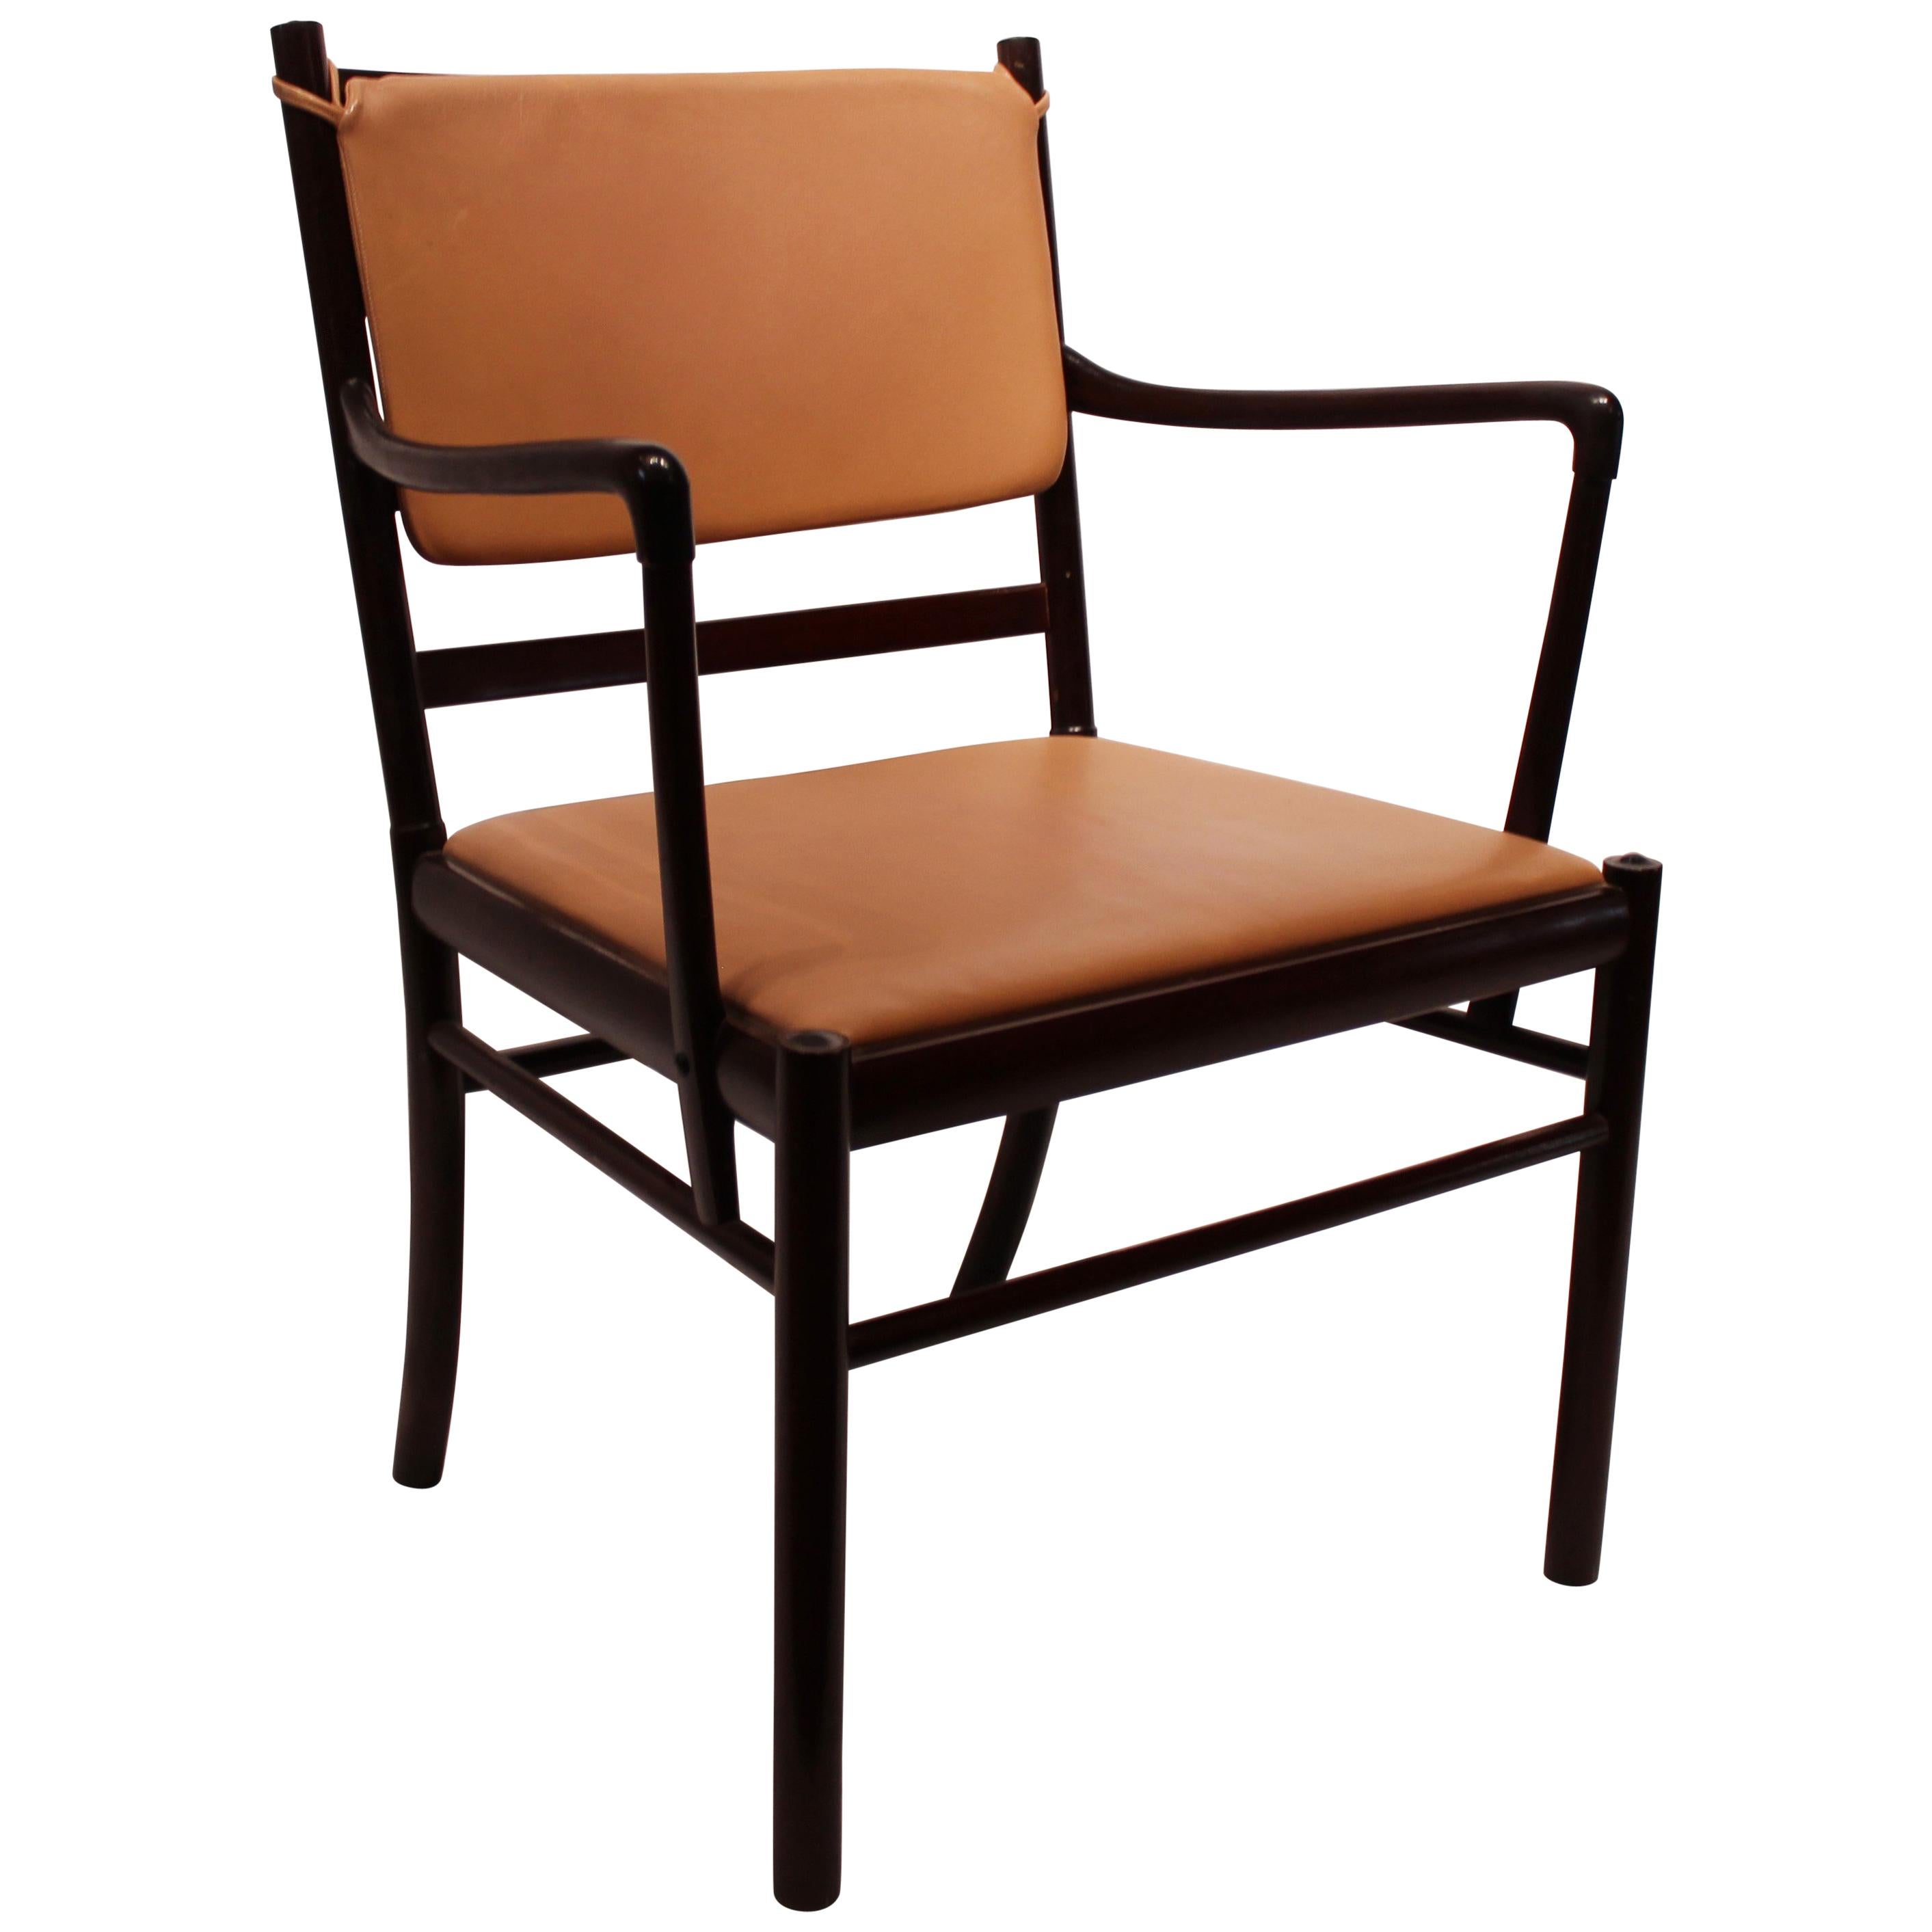 Armchair in Mahogany and Light Brown Leather by Ole Wanscher, 1960s